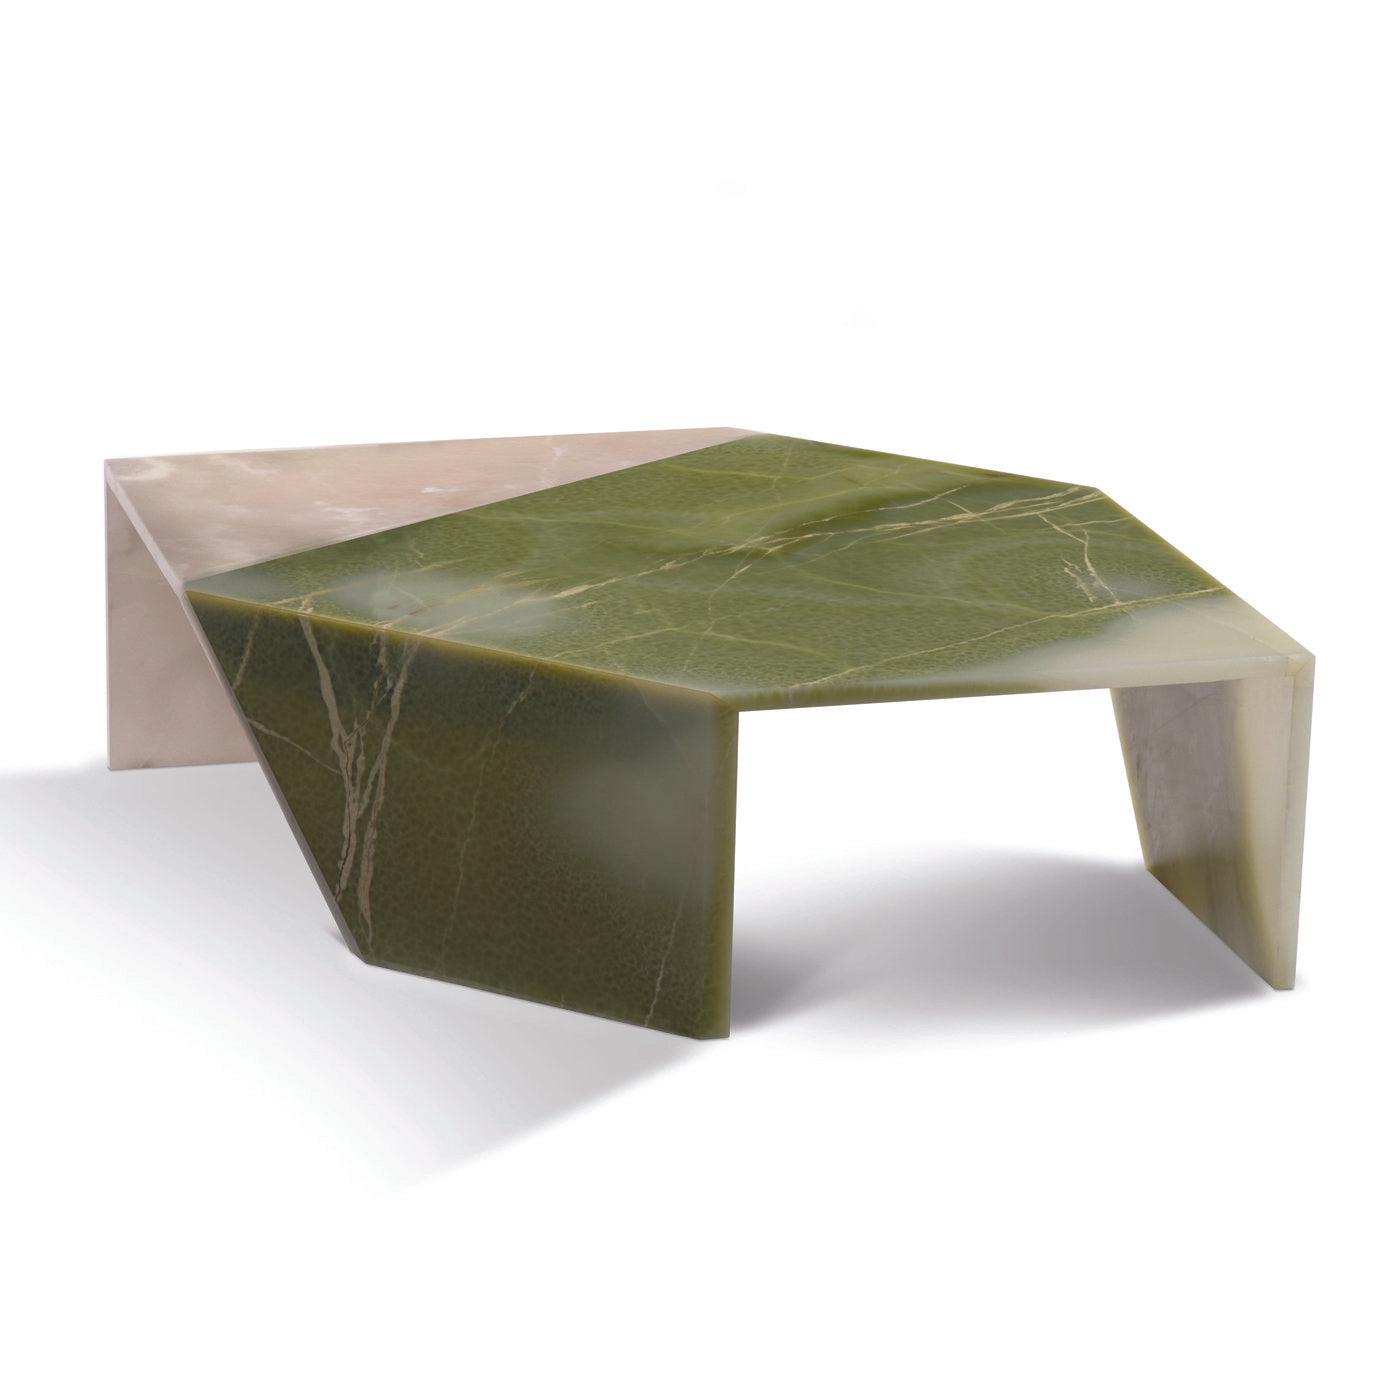 Green and White Origami Table by Patricia Urquiola - Alternative view 1